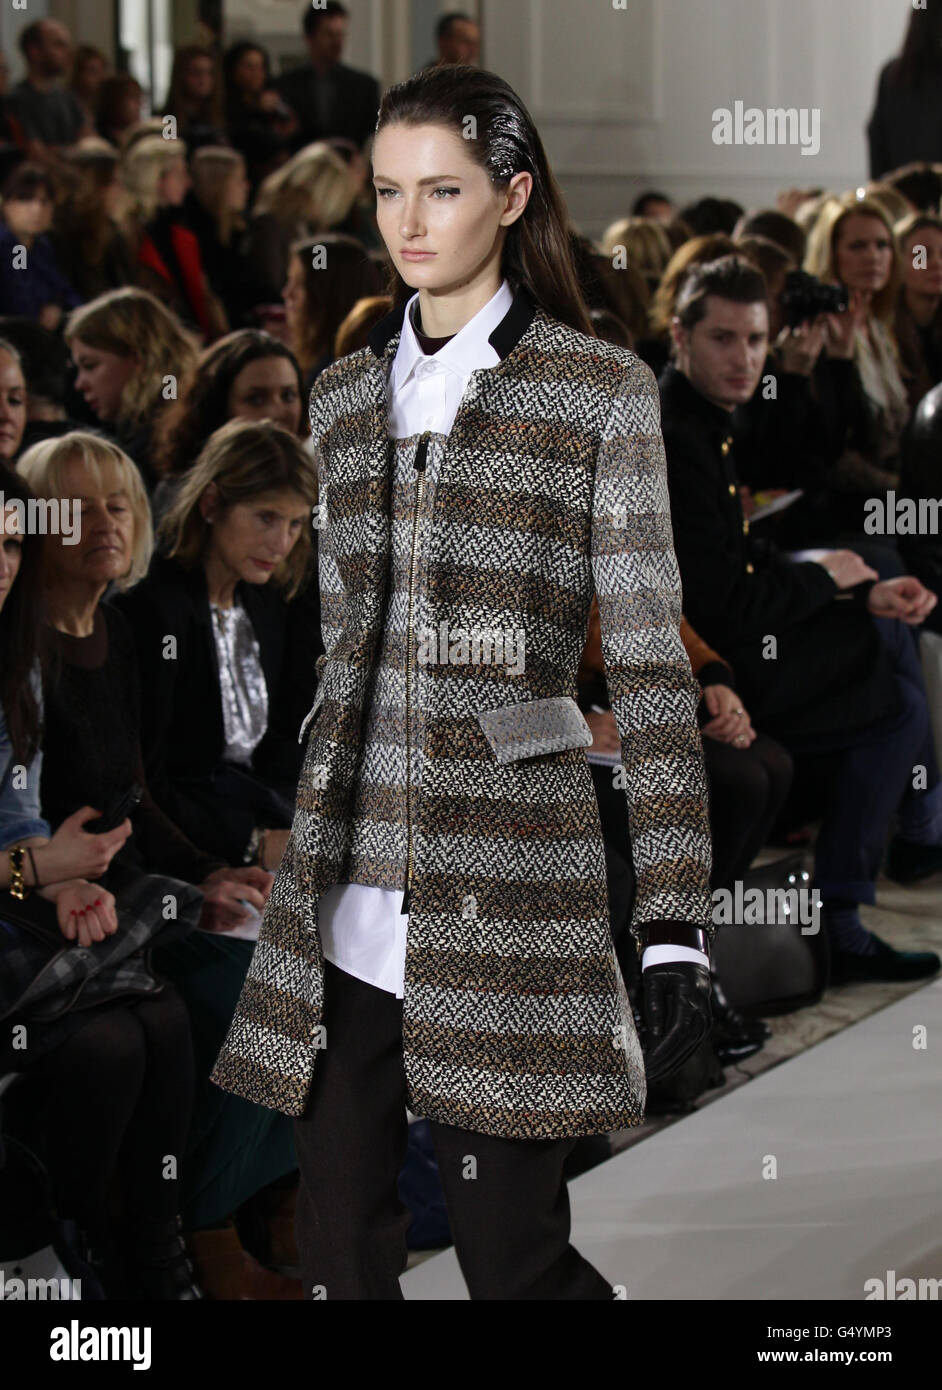 Models on the catwalk during the Aquascutum show, at The Savoy Hotel ...